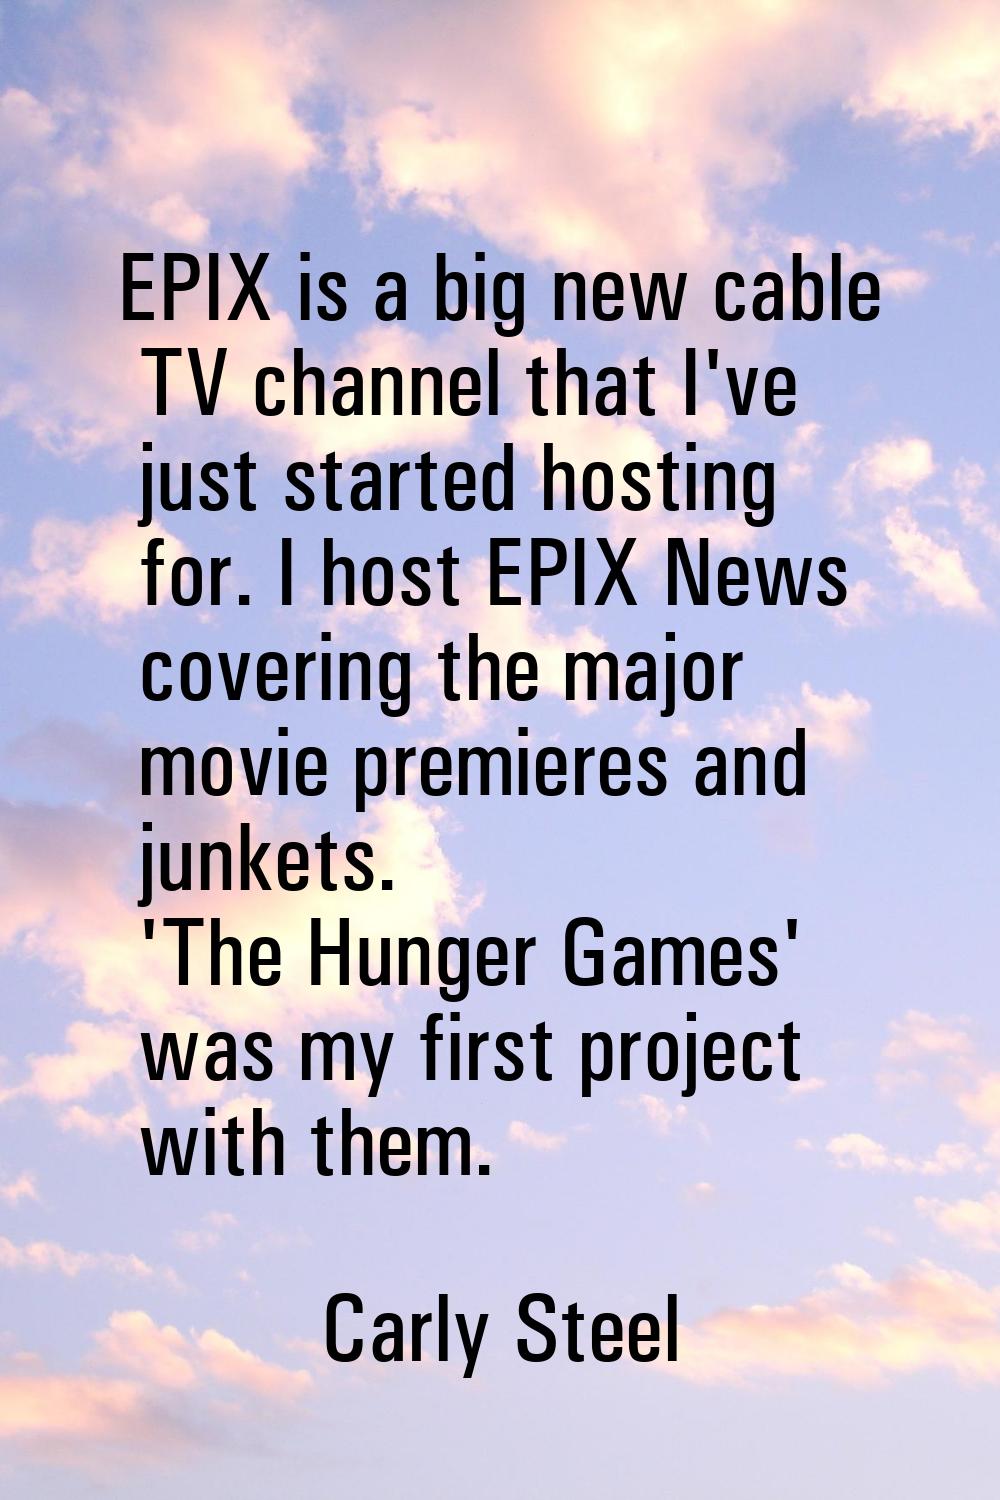 EPIX is a big new cable TV channel that I've just started hosting for. I host EPIX News covering th